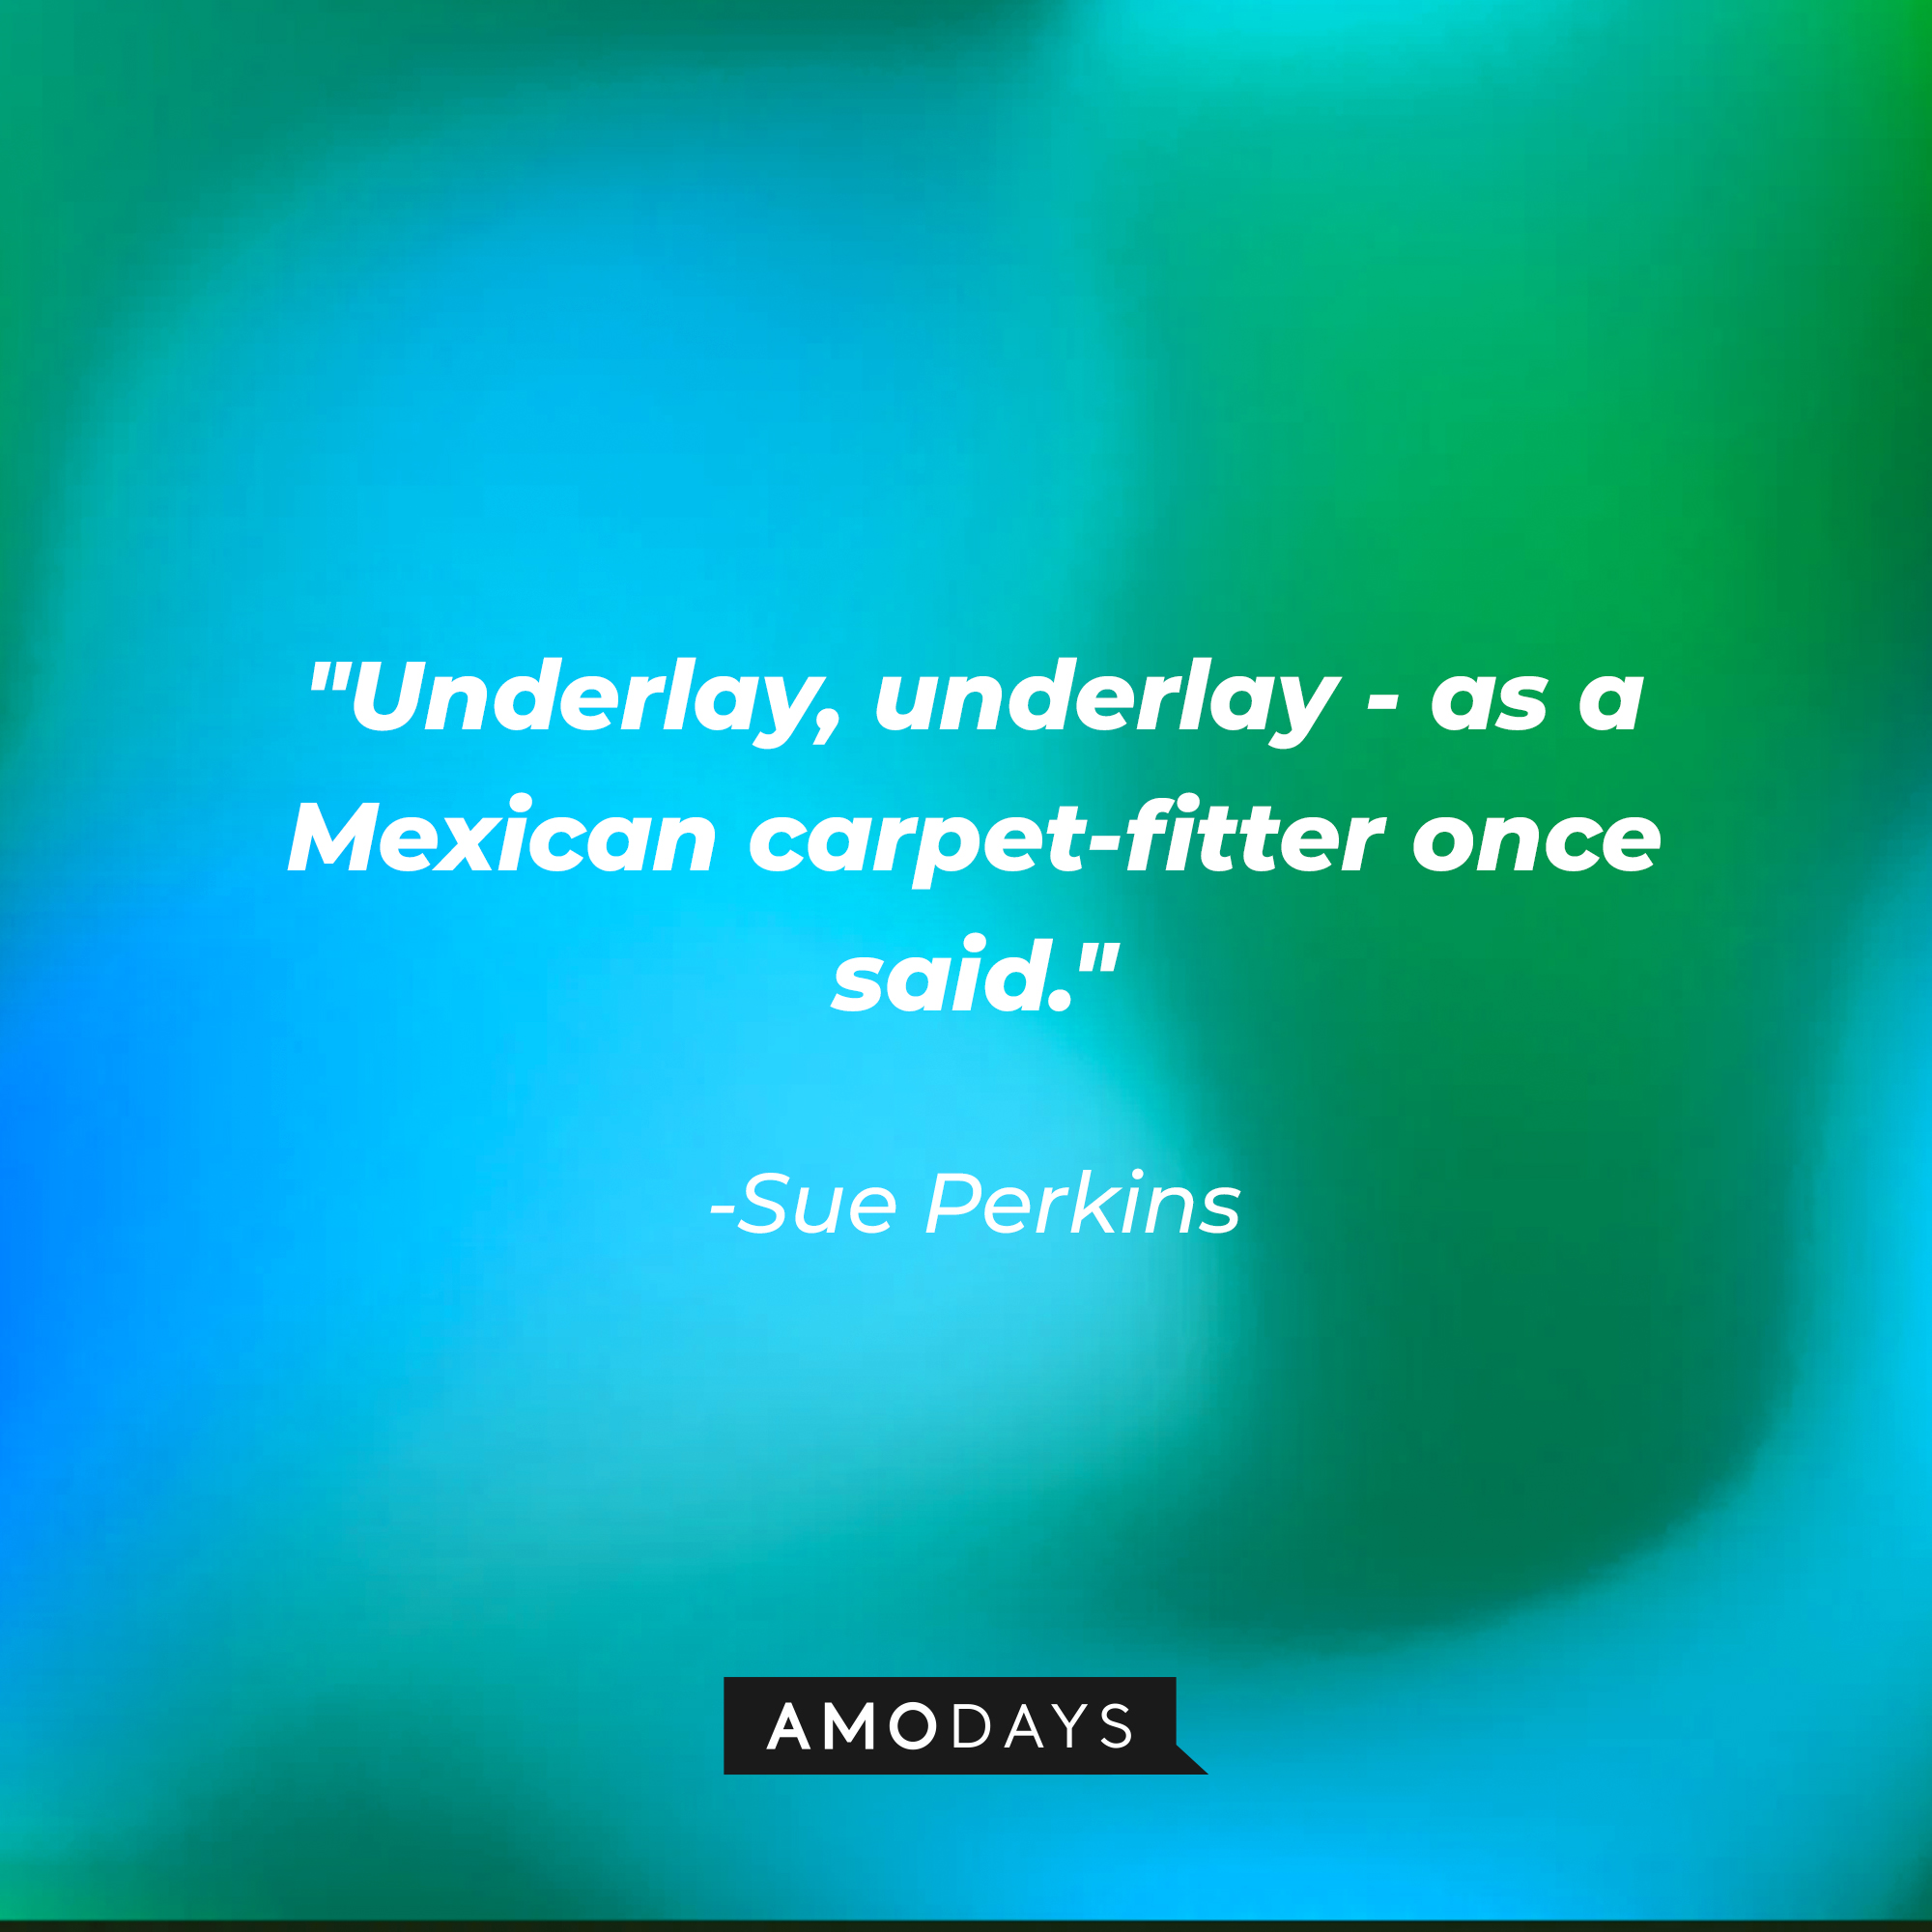 Sue Perkins' quote: “Underlay, underlay - as a Mexican carpet-fitter once said." | Image: AmoDays